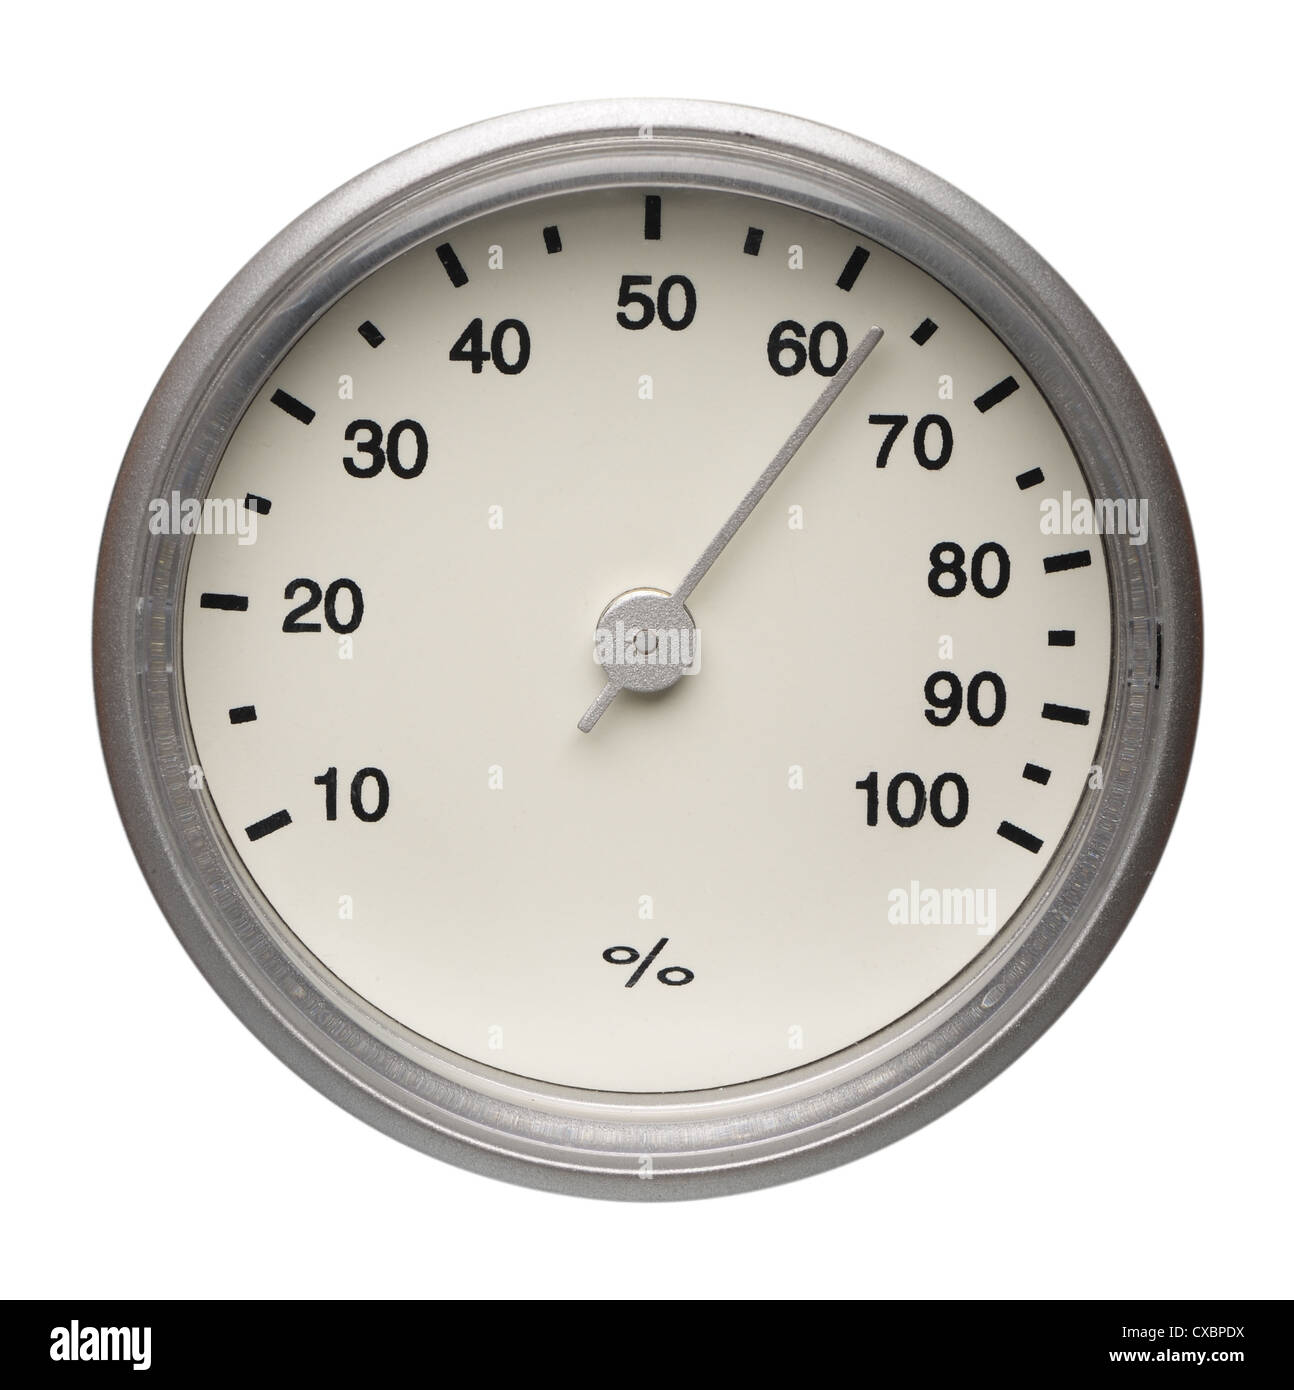 https://c8.alamy.com/comp/CXBPDX/dial-of-instrument-for-measuring-humidity-isolated-on-a-white-background-CXBPDX.jpg